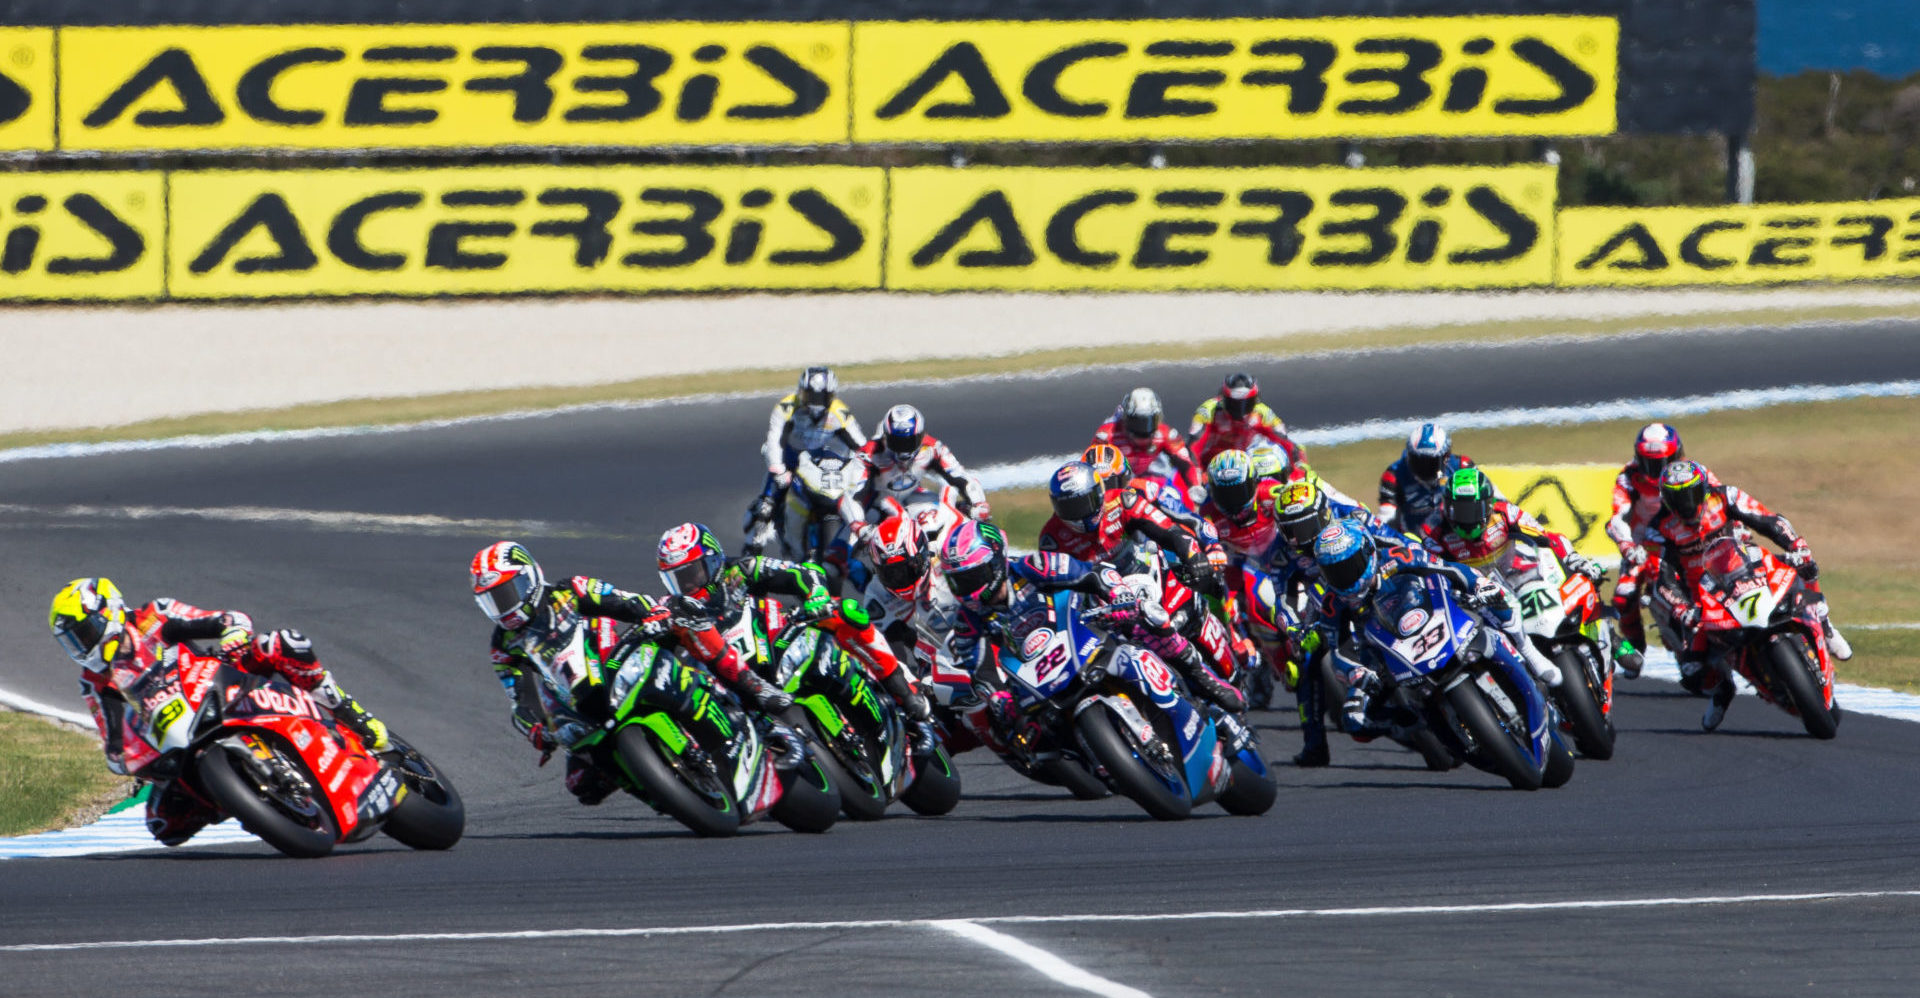 The start of a World Superbike race at Phillip Island in 2019. Photo courtesy of Dorna WorldSBK Press Office.